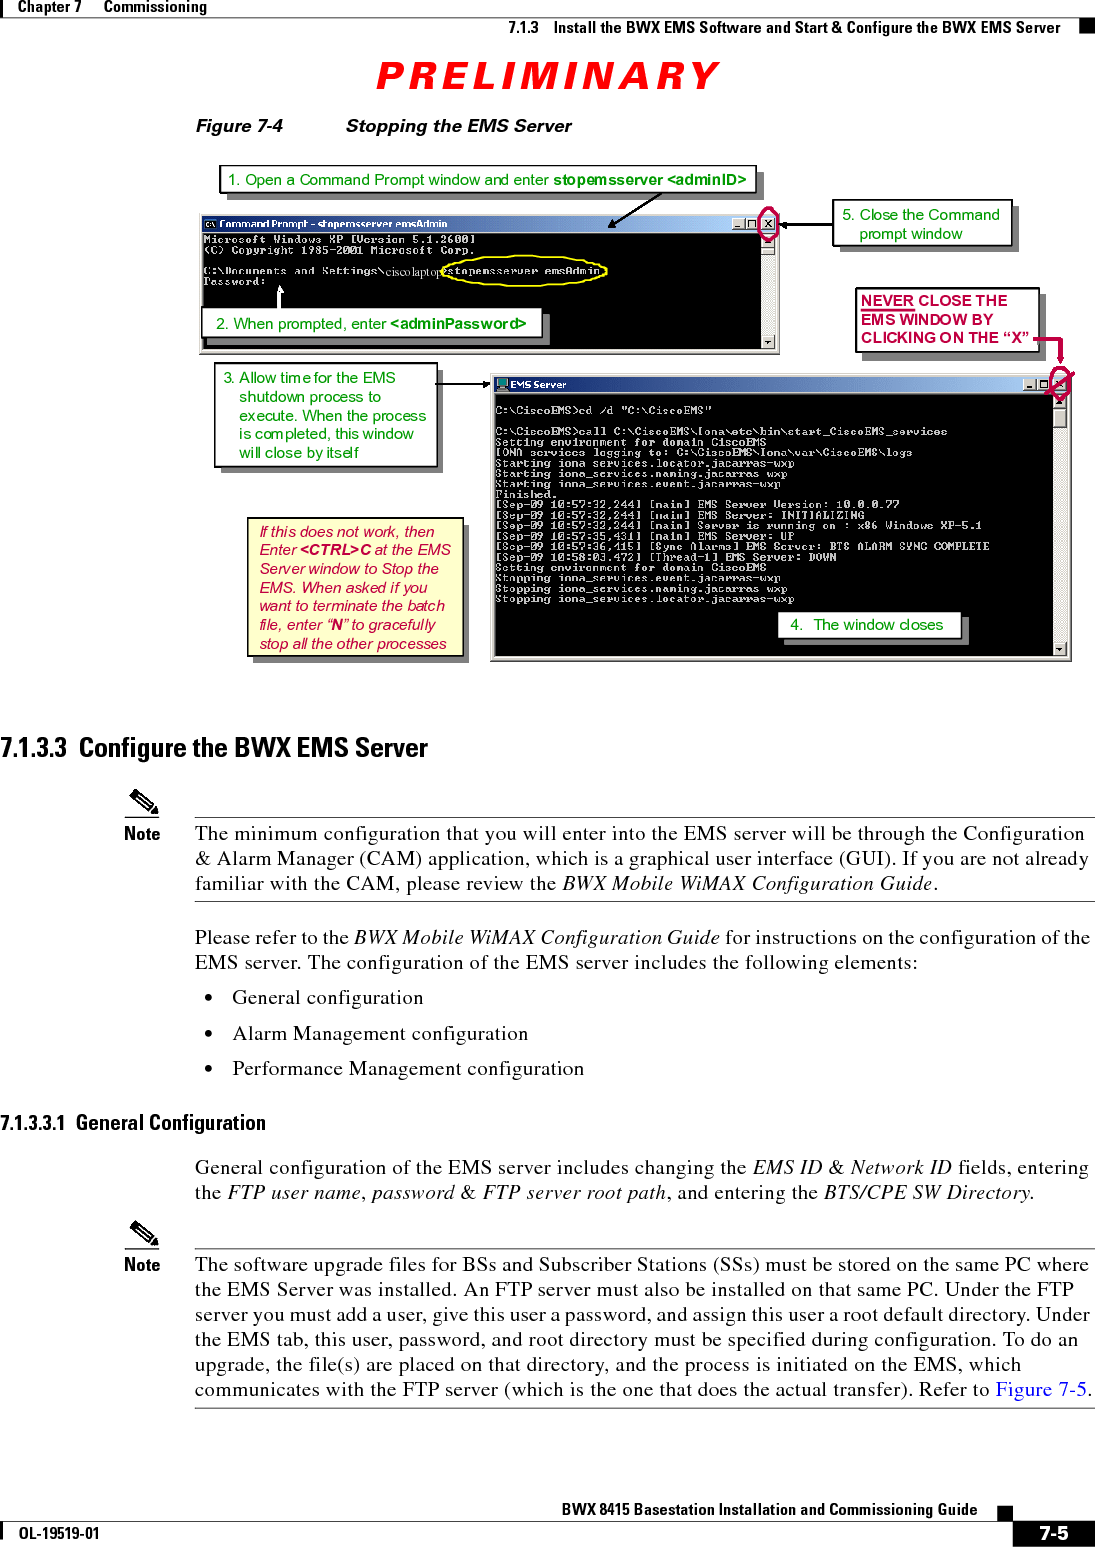 PRELIMINARY7-5BWX 8415 Basestation Installation and Commissioning GuideOL-19519-01Chapter 7      Commissioning7.1.3    Install the BWX EMS Software and Start &amp; Configure the BWX EMS ServerFigure 7-4 Stopping the EMS Server 7.1.3.3  Configure the BWX EMS ServerNote The minimum configuration that you will enter into the EMS server will be through the Configuration &amp; Alarm Manager (CAM) application, which is a graphical user interface (GUI). If you are not already familiar with the CAM, please review the BWX Mobile WiMAX Configuration Guide. Please refer to the BWX Mobile WiMAX Configuration Guide for instructions on the configuration of the EMS server. The configuration of the EMS server includes the following elements:  • General configuration  • Alarm Management configuration  • Performance Management configuration7.1.3.3.1  General ConfigurationGeneral configuration of the EMS server includes changing the EMS ID &amp; Network ID fields, entering the FTP user name, password &amp; FTP server root path, and entering the BTS/CPE SW Directory.Note The software upgrade files for BSs and Subscriber Stations (SSs) must be stored on the same PC where the EMS Server was installed. An FTP server must also be installed on that same PC. Under the FTP server you must add a user, give this user a password, and assign this user a root default directory. Under the EMS tab, this user, password, and root directory must be specified during configuration. To do an upgrade, the file(s) are placed on that directory, and the process is initiated on the EMS, which communicates with the FTP server (which is the one that does the actual transfer). Refer to Figure 7-5.If this does not work, thenEnter &lt;CTRL&gt;C at the EMSServer window to Stop theEMS. When asked if youwant to terminate the batchfile, enter “N” to gracefullystop all the other processes 3. Allow time for the EMSshutdown process toexecute. When the processis com pleted, this windowwill close by itselfNEVER CLOSE THEEMS WINDOW BYCLICKING ON THE “X” &quot;&quot;4. The window closes4. The window closes4. The window closes4. The window closesciscolaptop2. When prompted, enter &lt;adminPassword&gt;1. Open a Command Prompt window and enter stopemsserver &lt;adminID&gt;5. Close the Commandprompt windowIf this does not work, thenEnter &lt;CTRL&gt;C at the EMSServer window to Stop theEMS. When asked if youwant to terminate the batchfile, enter “N” to gracefullystop all the other processes 3. Allow time for the EMSshutdown process toexecute. When the processis com pleted, this windowwill close by itselfNEVER CLOSE THEEMS WINDOW BYCLICKING ON THE “X” &quot;&quot;4. The window closes4. The window closes4. The window closes4. The window closesIf this does not work, thenEnter &lt;CTRL&gt;C at the EMSServer window to Stop theEMS. When asked if youwant to terminate the batchfile, enter “N” to gracefullystop all the other processes If this does not work, thenEnter &lt;CTRL&gt;C at the EMSServer window to Stop theEMS. When asked if youwant to terminate the batchfile, enter “N” to gracefullystop all the other processes 3. Allow time for the EMSshutdown process toexecute. When the processis com pleted, this windowwill close by itselfNEVER CLOSE THEEMS WINDOW BYCLICKING ON THE “X” &quot;&quot;4. The window closes4. The window closes4. The window closes4. The window closes3. Allow time for the EMSshutdown process toexecute. When the processis com pleted, this windowwill close by itself3. Allow time for the EMSshutdown process toexecute. When the processis com pleted, this windowwill close by itself3. Allow time for the EMSshutdown process toexecute. When the processis com pleted, this windowwill close by itselfNEVER CLOSE THEEMS WINDOW BYCLICKING ON THE “X” &quot;&quot;4. The window closes4. The window closes4. The window closes4. The window closesNEVER CLOSE THEEMS WINDOW BYCLICKING ON THE “X” &quot;&quot;NEVER CLOSE THEEMS WINDOW BYCLICKING ON THE “X”NEVER CLOSE THEEMS WINDOW BYCLICKING ON THE “X” &quot;&quot;&quot;&quot;4. The window closes4. The window closes4. The window closes4. The window closes4. The window closes4. The window closes4. The window closes4. The window closesciscolaptop2. When prompted, enter &lt;adminPassword&gt;1. Open a Command Prompt window and enter stopemsserver &lt;adminID&gt;5. Close the Commandprompt windowciscolaptop2. When prompted, enter &lt;adminPassword&gt;ciscolaptopciscolaptopciscolaptop2. When prompted, enter &lt;adminPassword&gt;2. When prompted, enter &lt;adminPassword&gt;1. Open a Command Prompt window and enter stopemsserver &lt;adminID&gt;1. Open a Command Prompt window and enter stopemsserver &lt;adminID&gt;1. Open a Command Prompt window and enter stopemsserver &lt;adminID&gt;5. Close the Commandprompt window5. Close the Commandprompt window5. Close the Commandprompt window